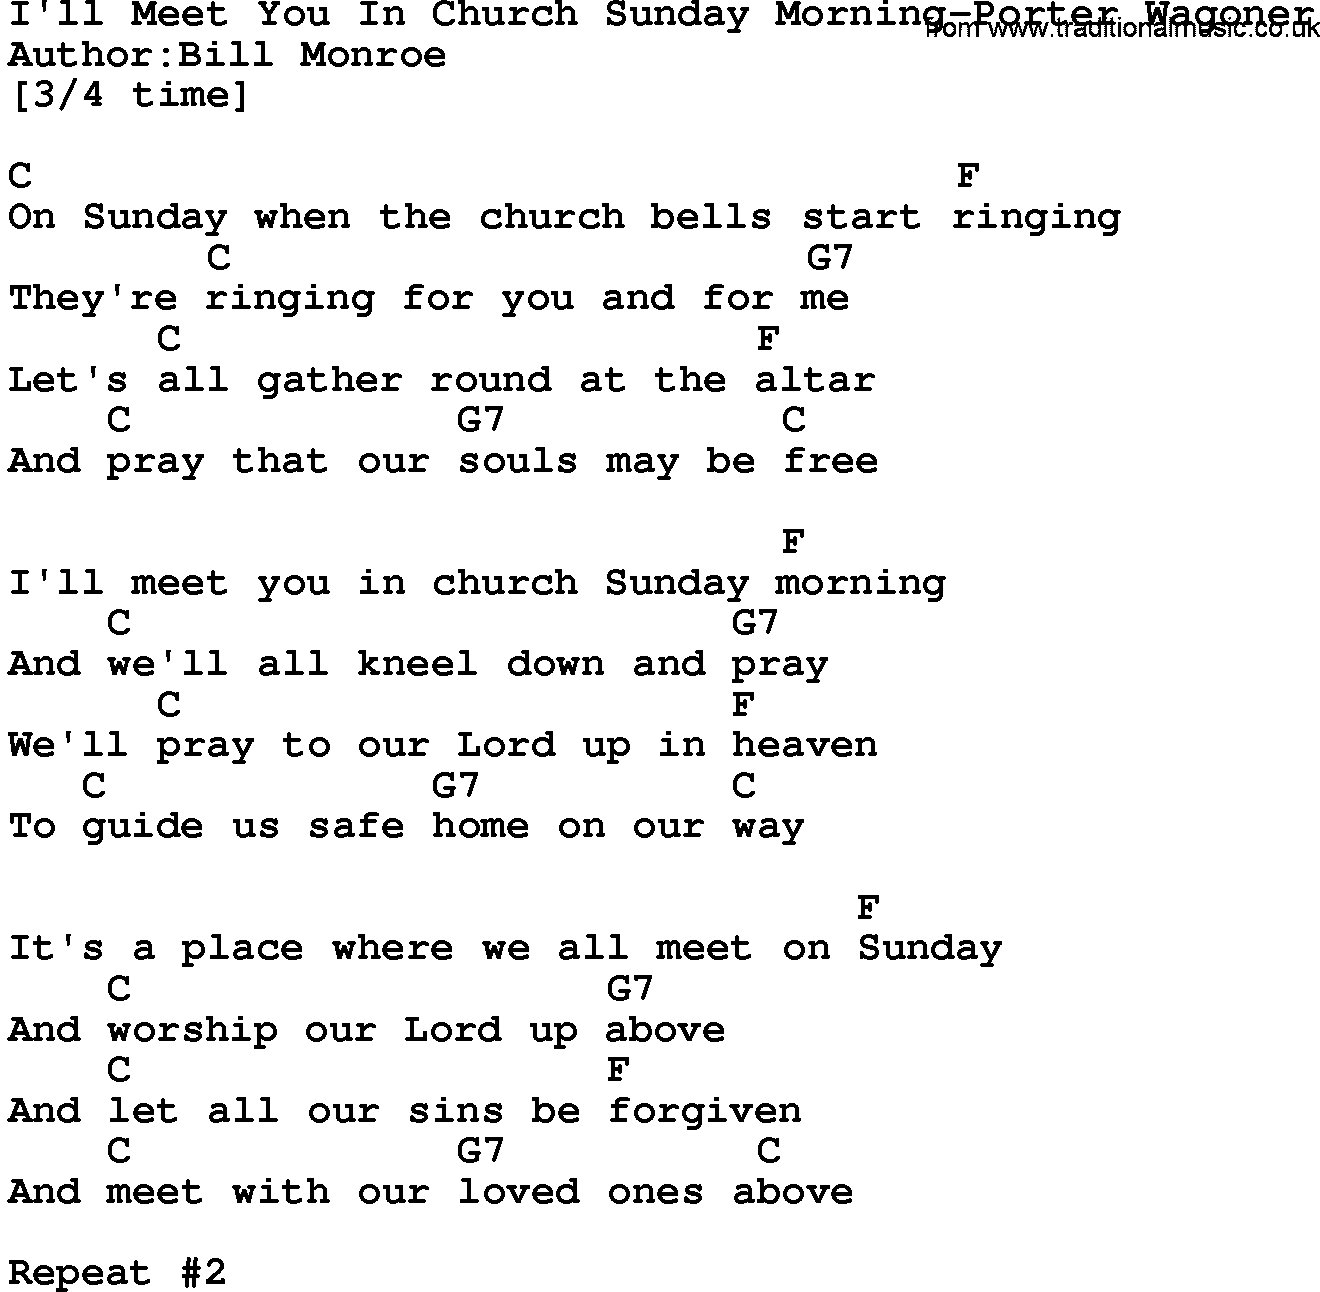 Country Music:i'll Meet You In Church Sunday Morning-Porter Wagoner Lyrics And Chords